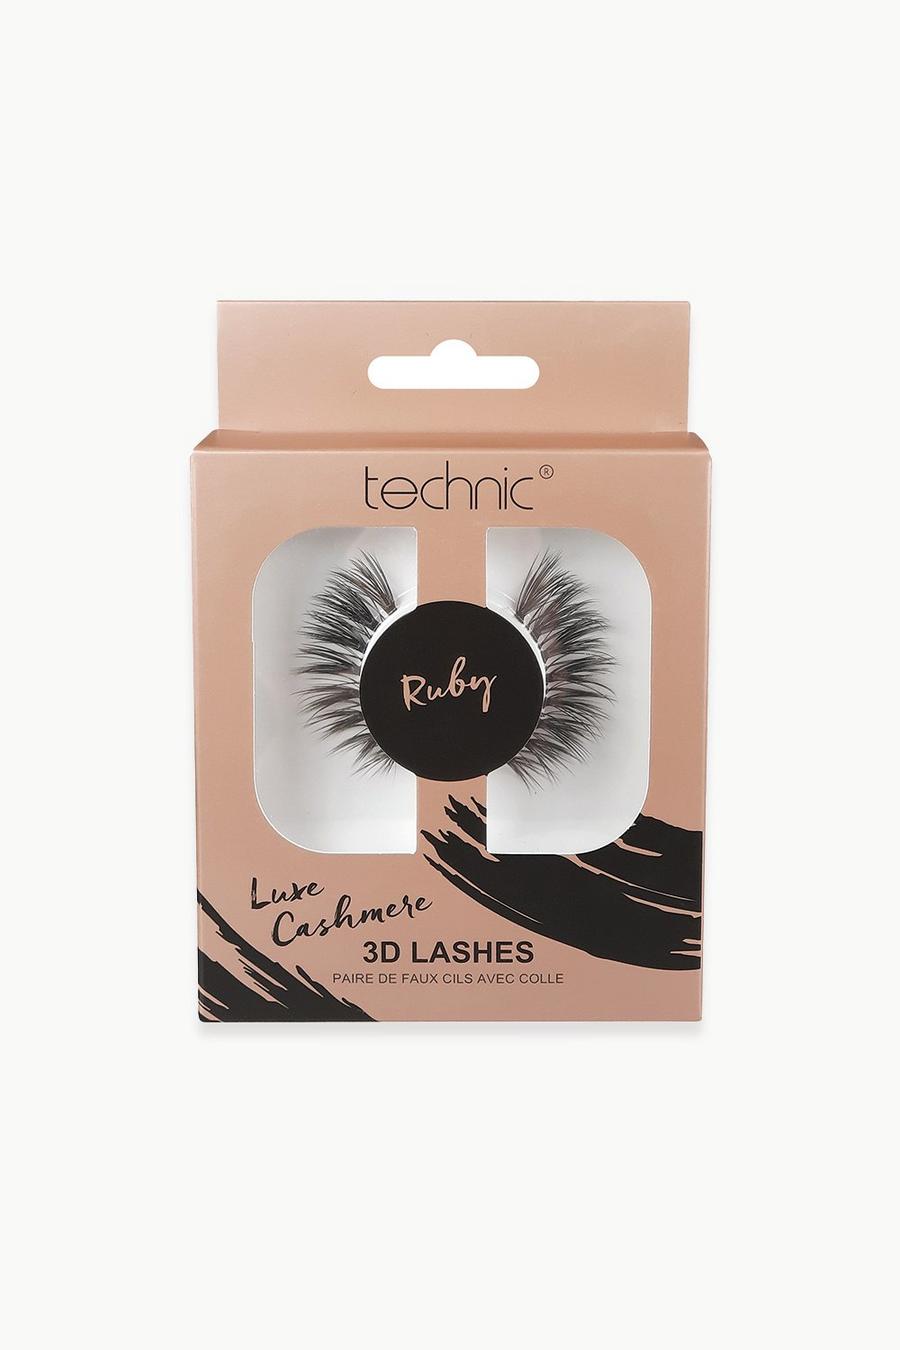 Technic - Faux cils Luxe Cashmere - Ruby, Black image number 1